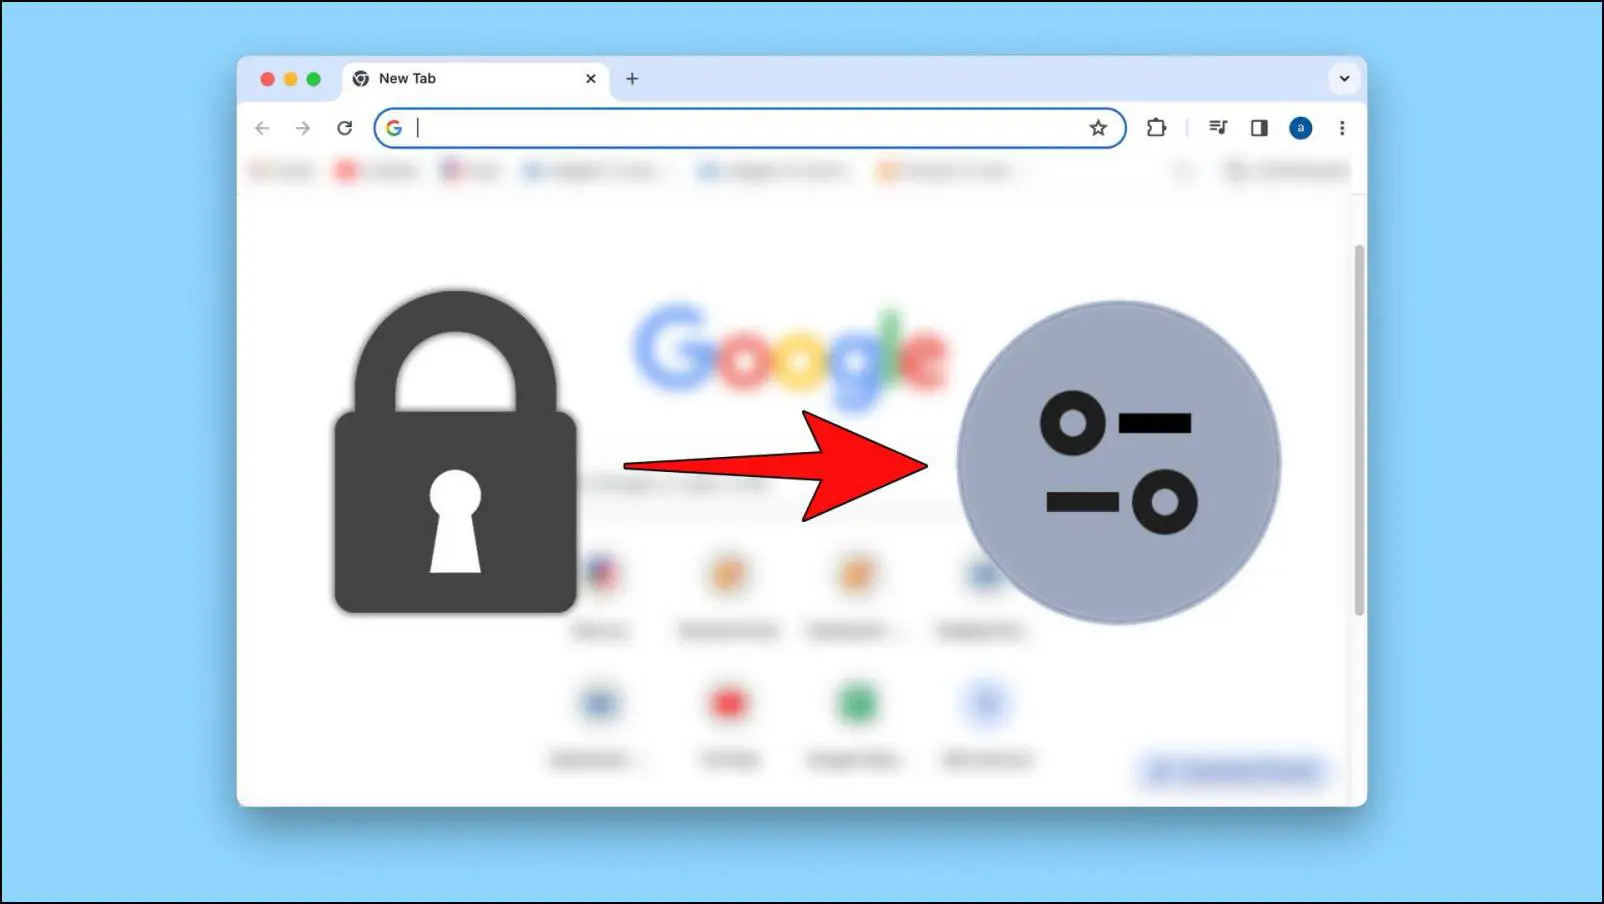 Lock Icon Changed to Tune Icon in Google Chrome